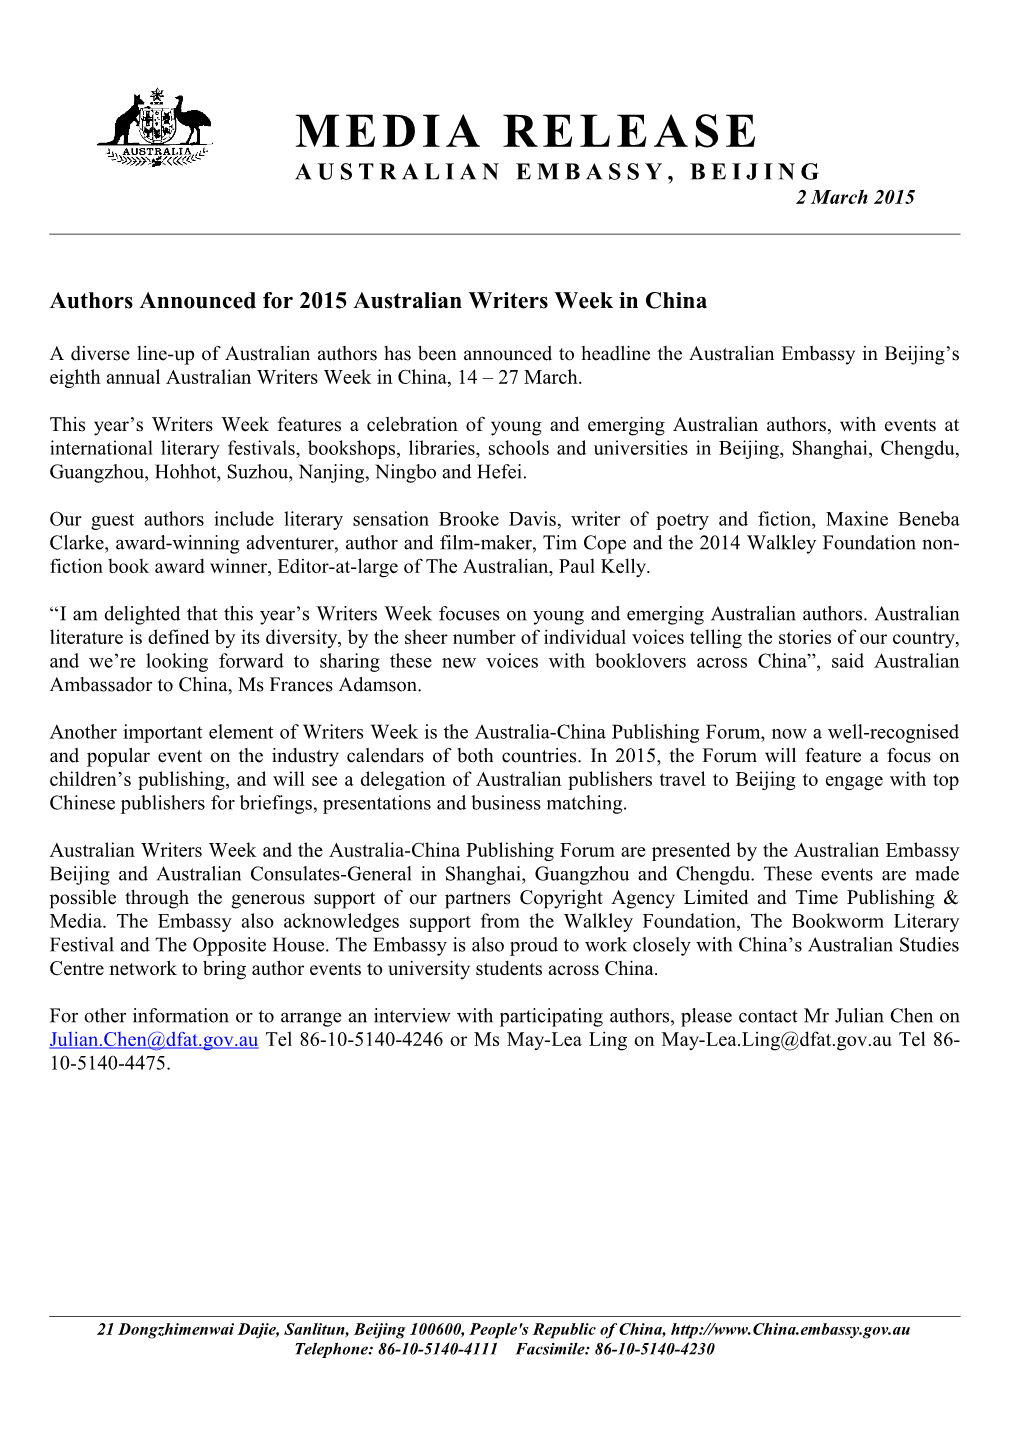 Authors Announced for 2015 Australian Writers Week in China